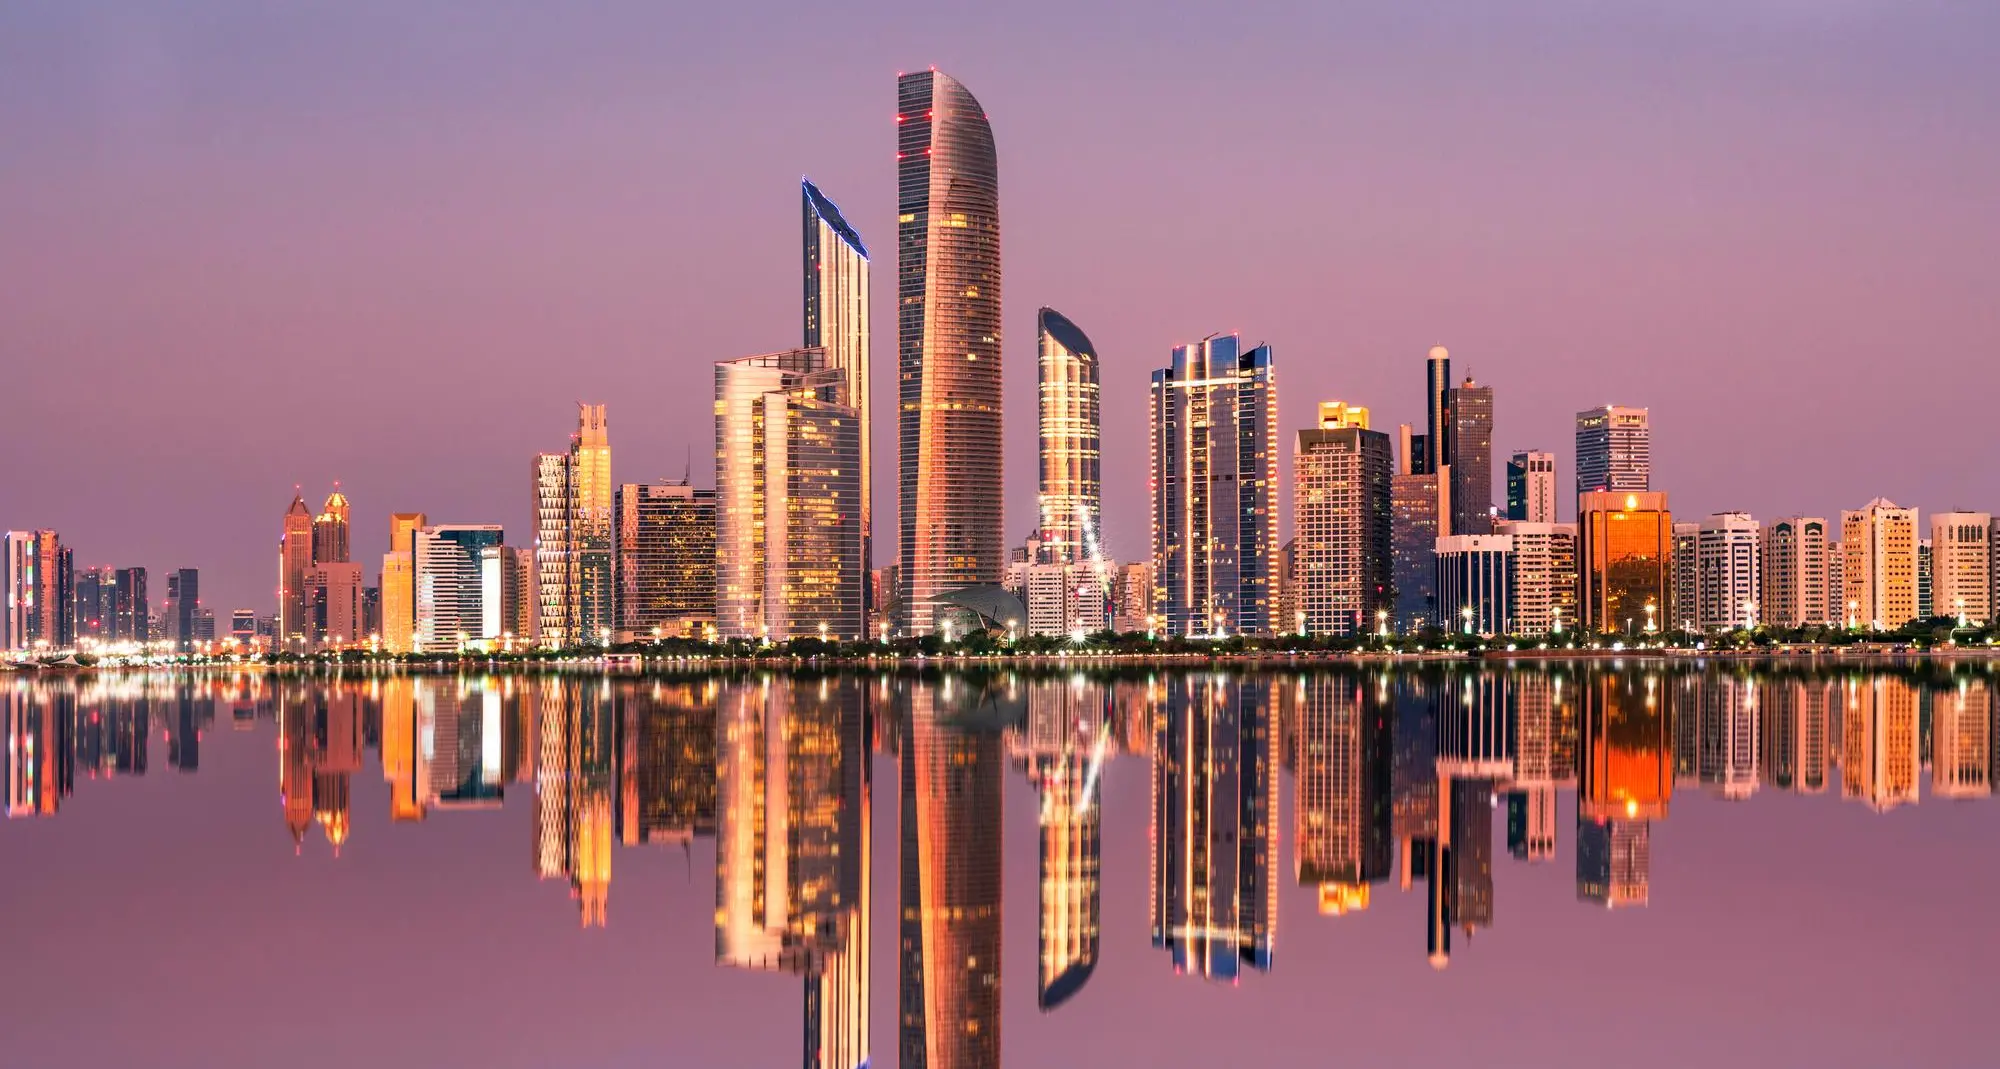 Abu Dhabi is the world’s newest billionaire haven: Bloomberg